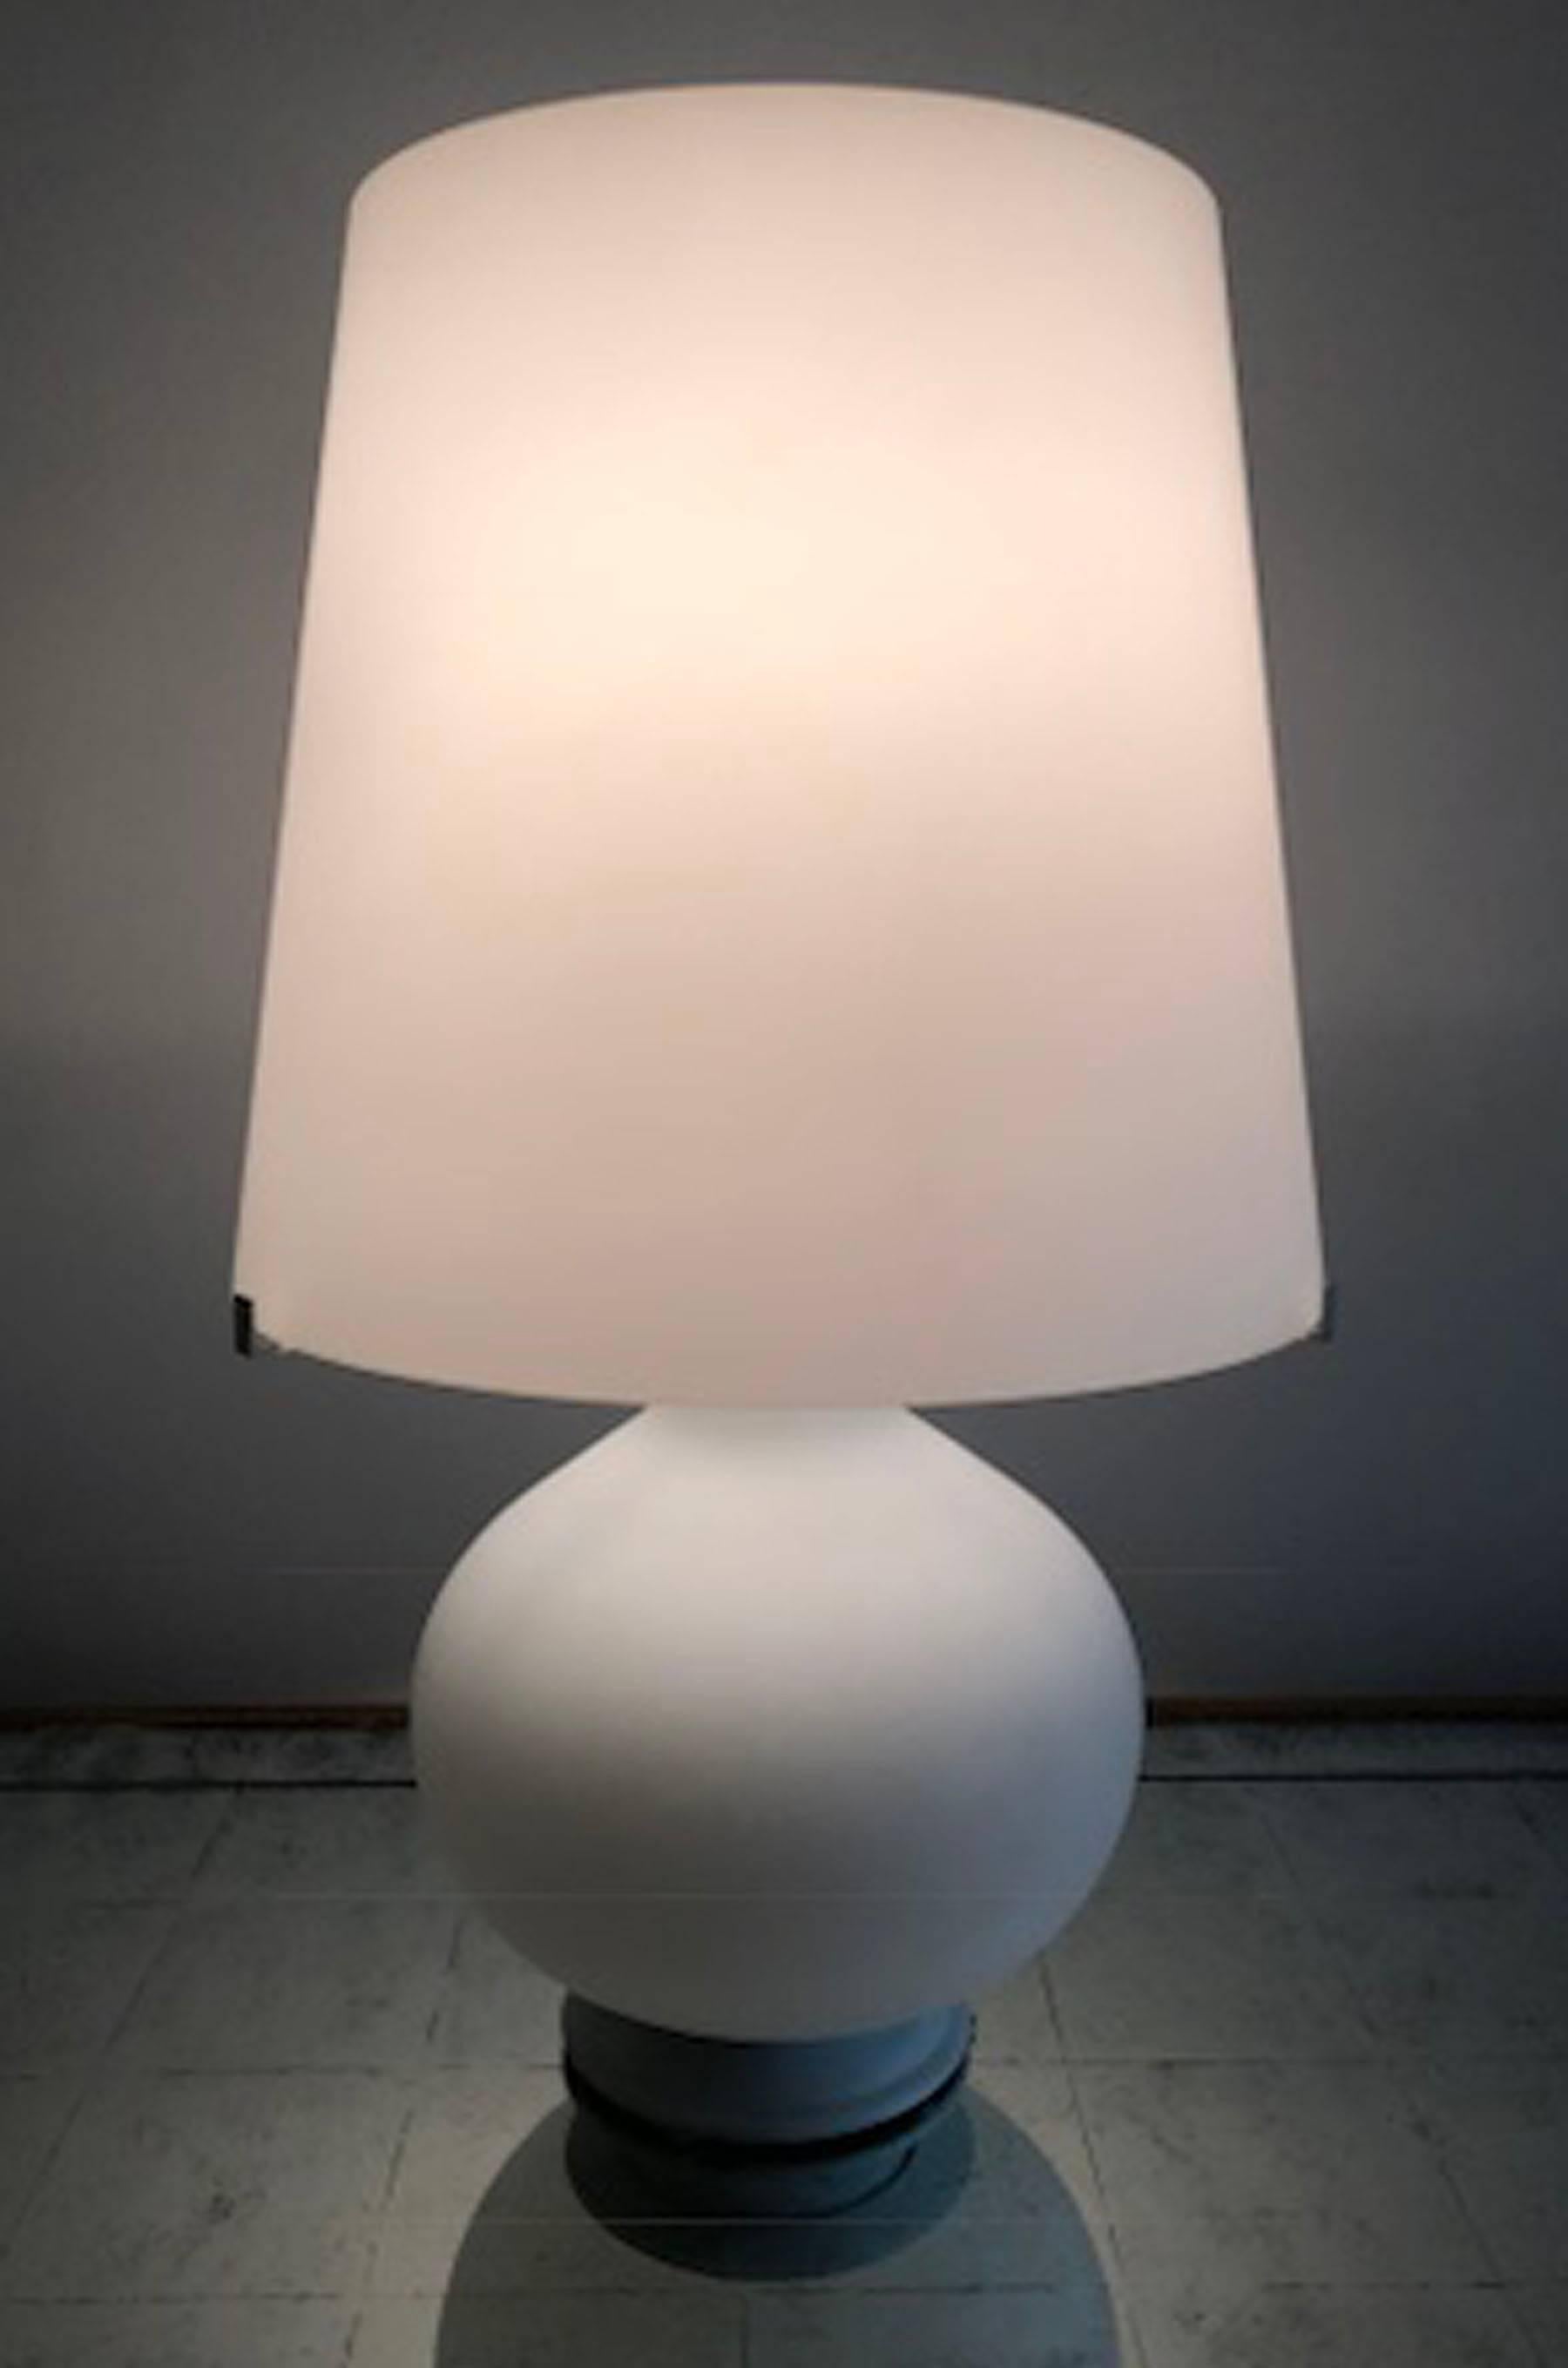 Fontana Arte glass lamp, model small size: model #1853. Designed in 1954 by Max Ingrand. Illuminate the top, bottom or both.